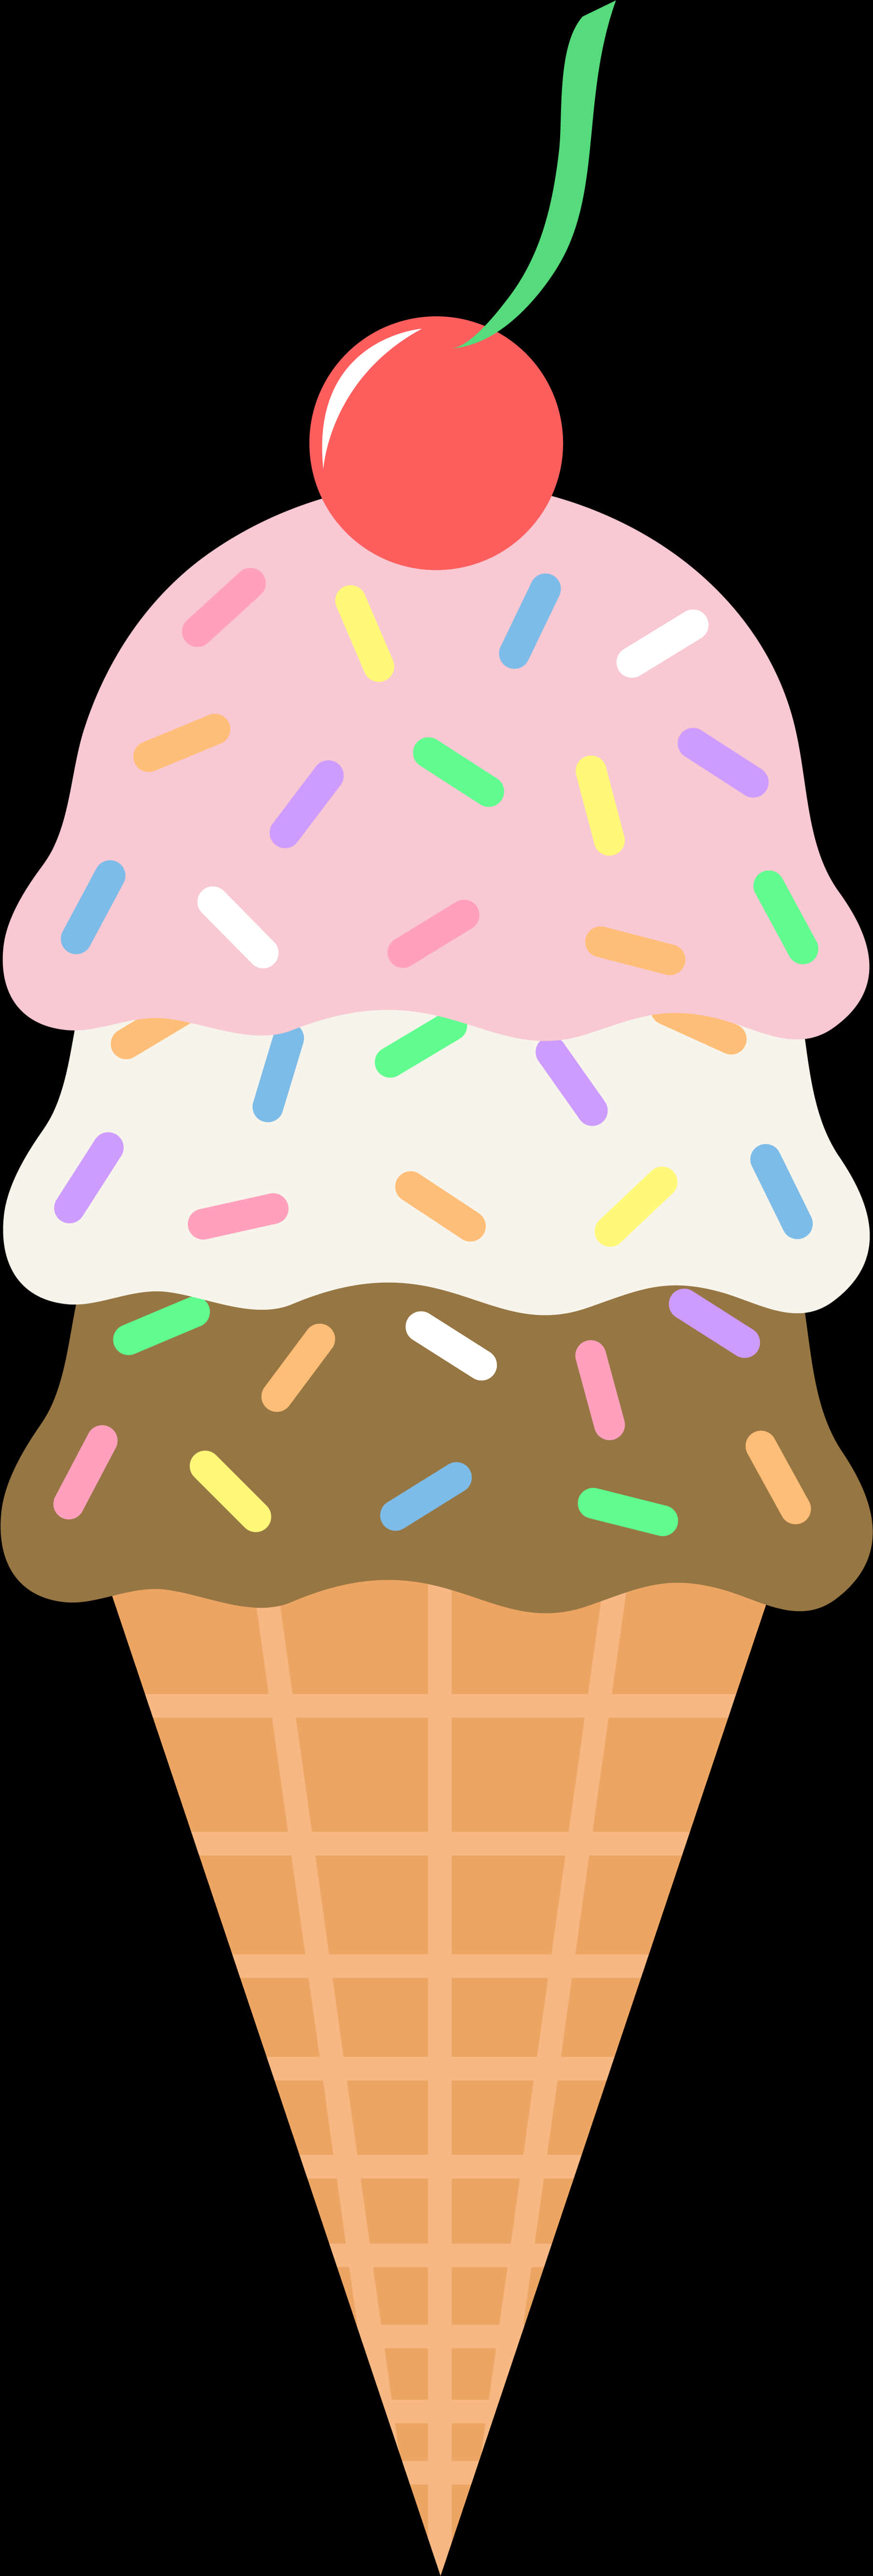 A Large Ice Cream Cone With Sprinkles